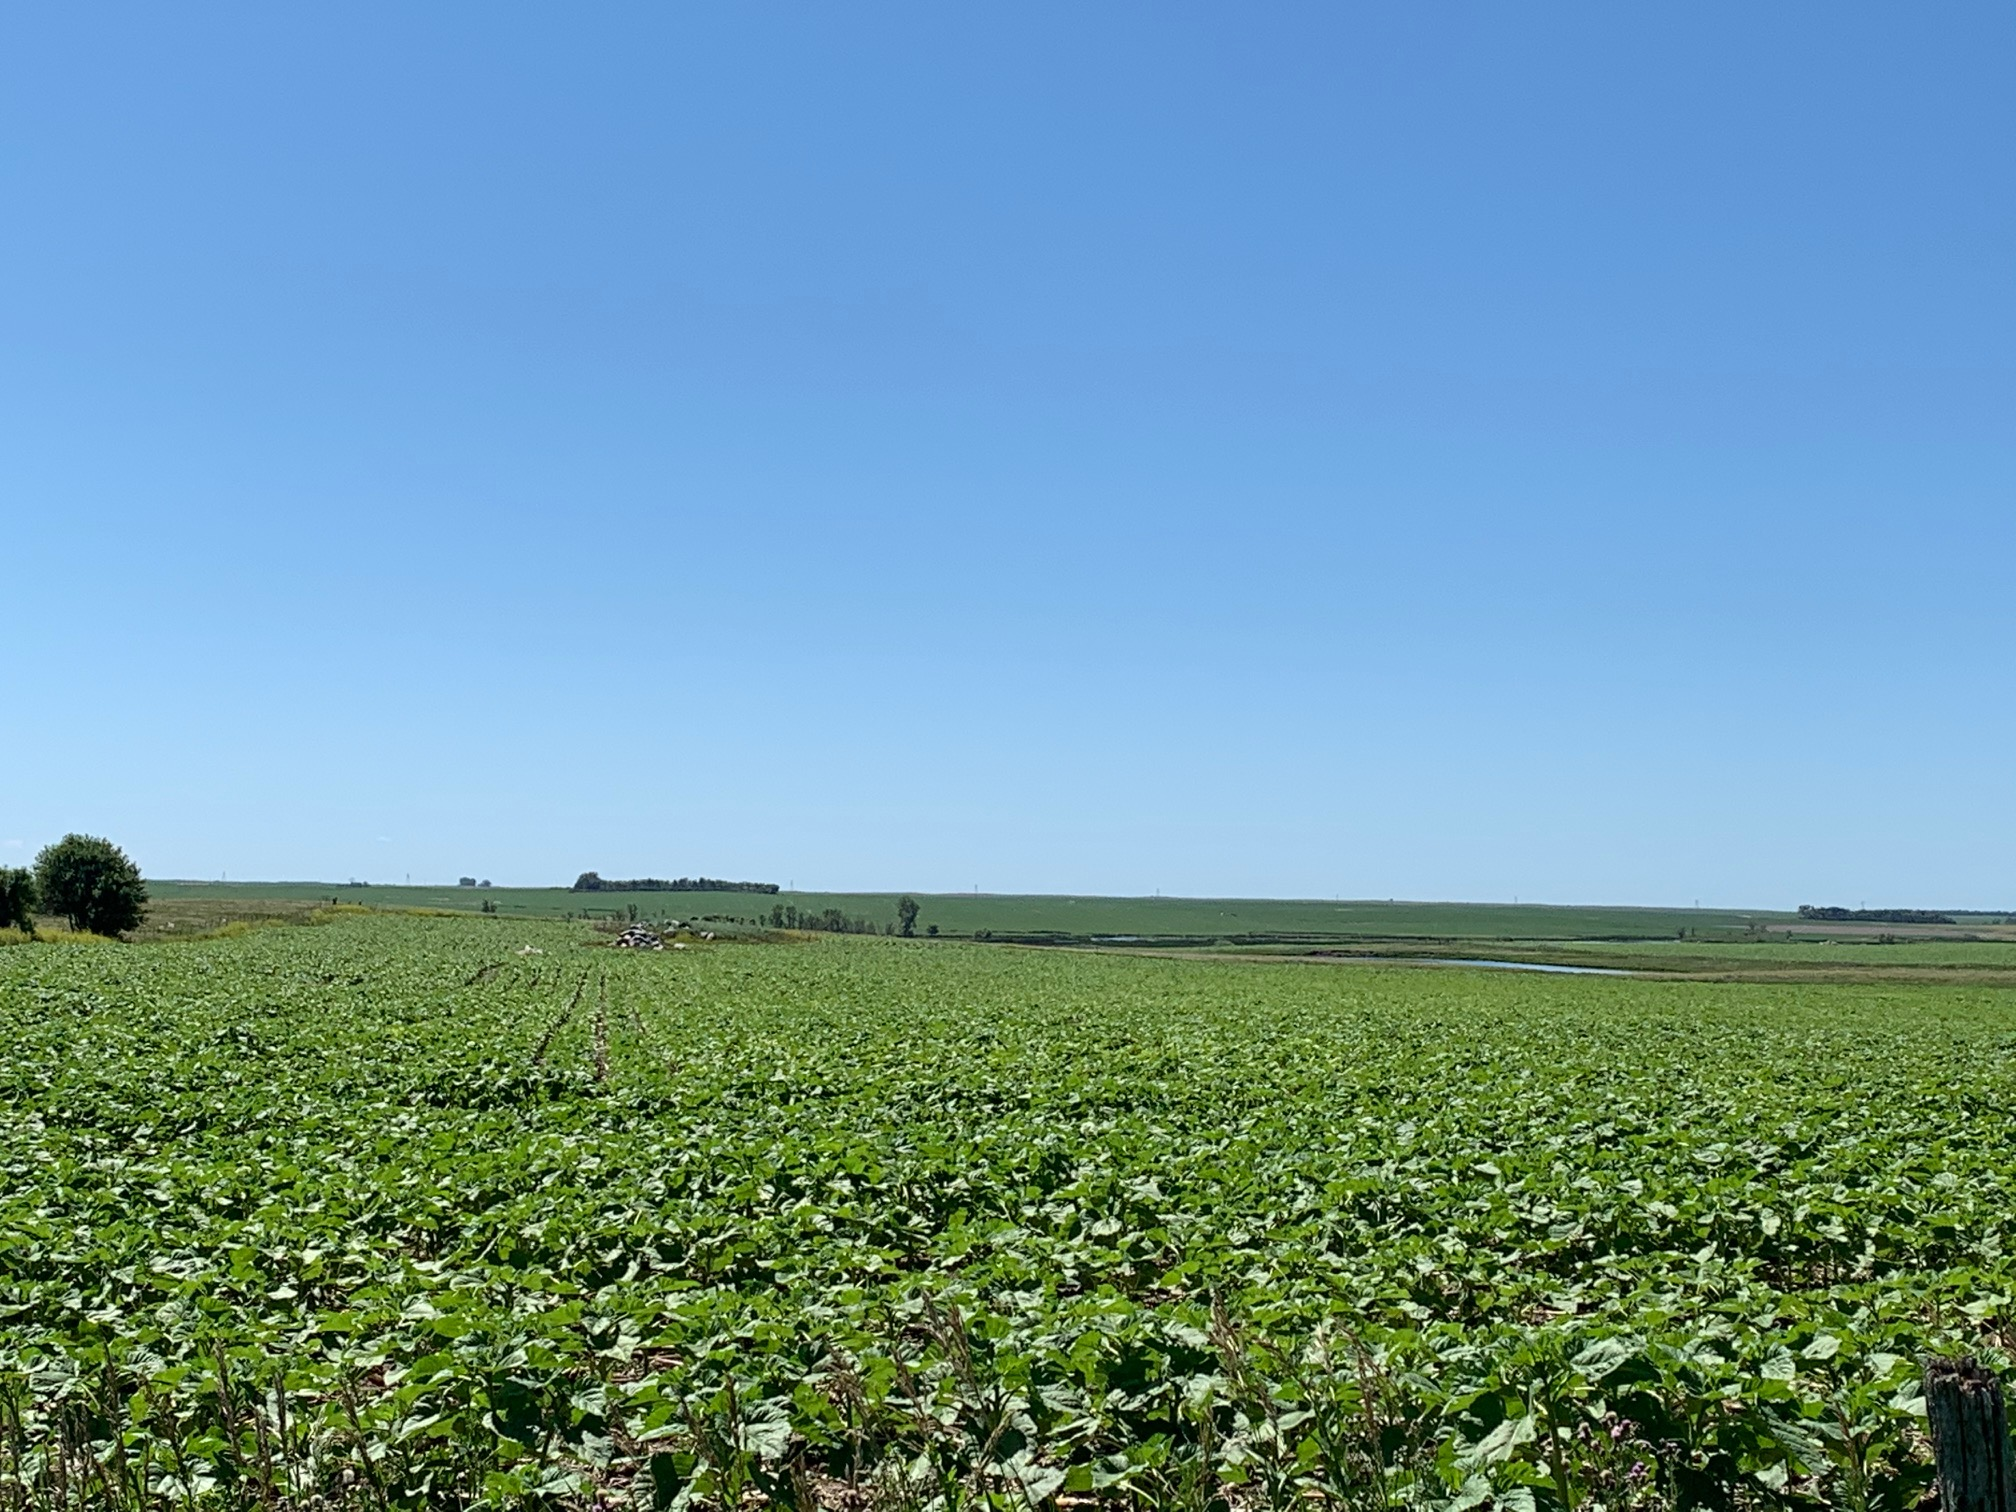 Afternoon Ag News, July 26, 2021: Farmer leaders meet to set funding priorities for 2022